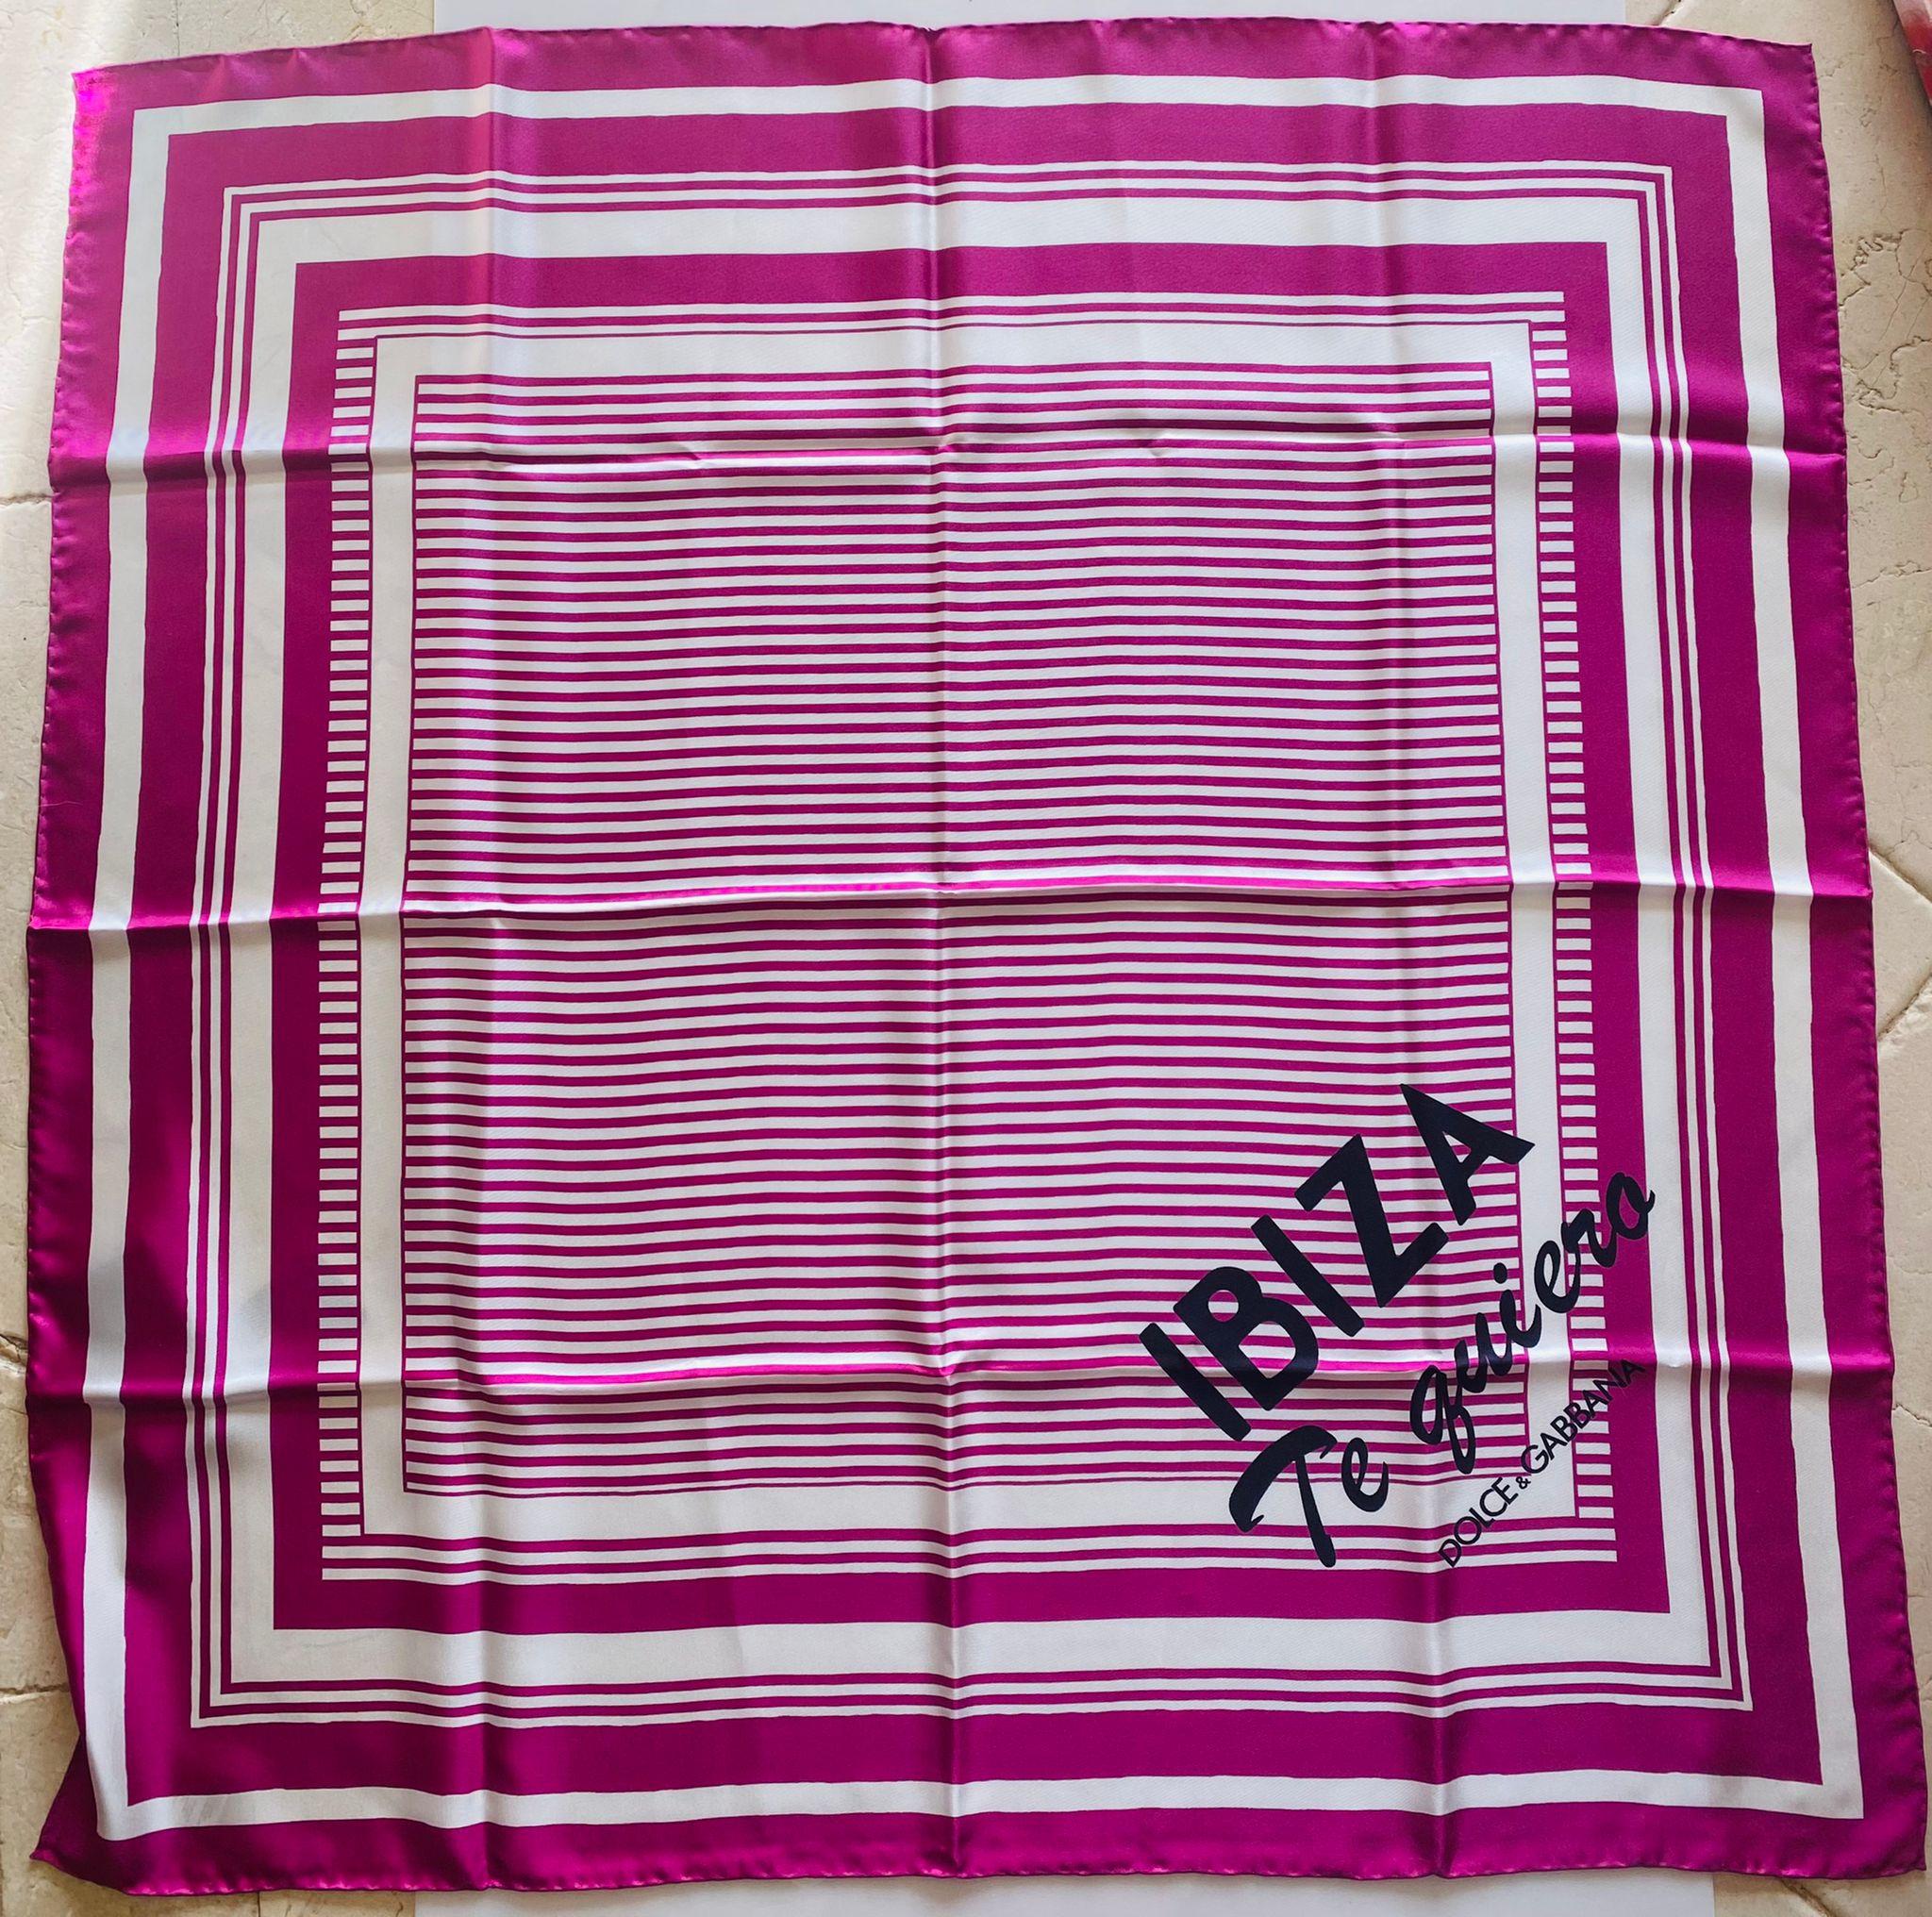 Dolce & Gabbana Silk Square I LOVE IBIZA theme scarf 

90cmx90cm 
100% silk 
Brand new with tags! 

Please check my other DG clothing & accessories!
